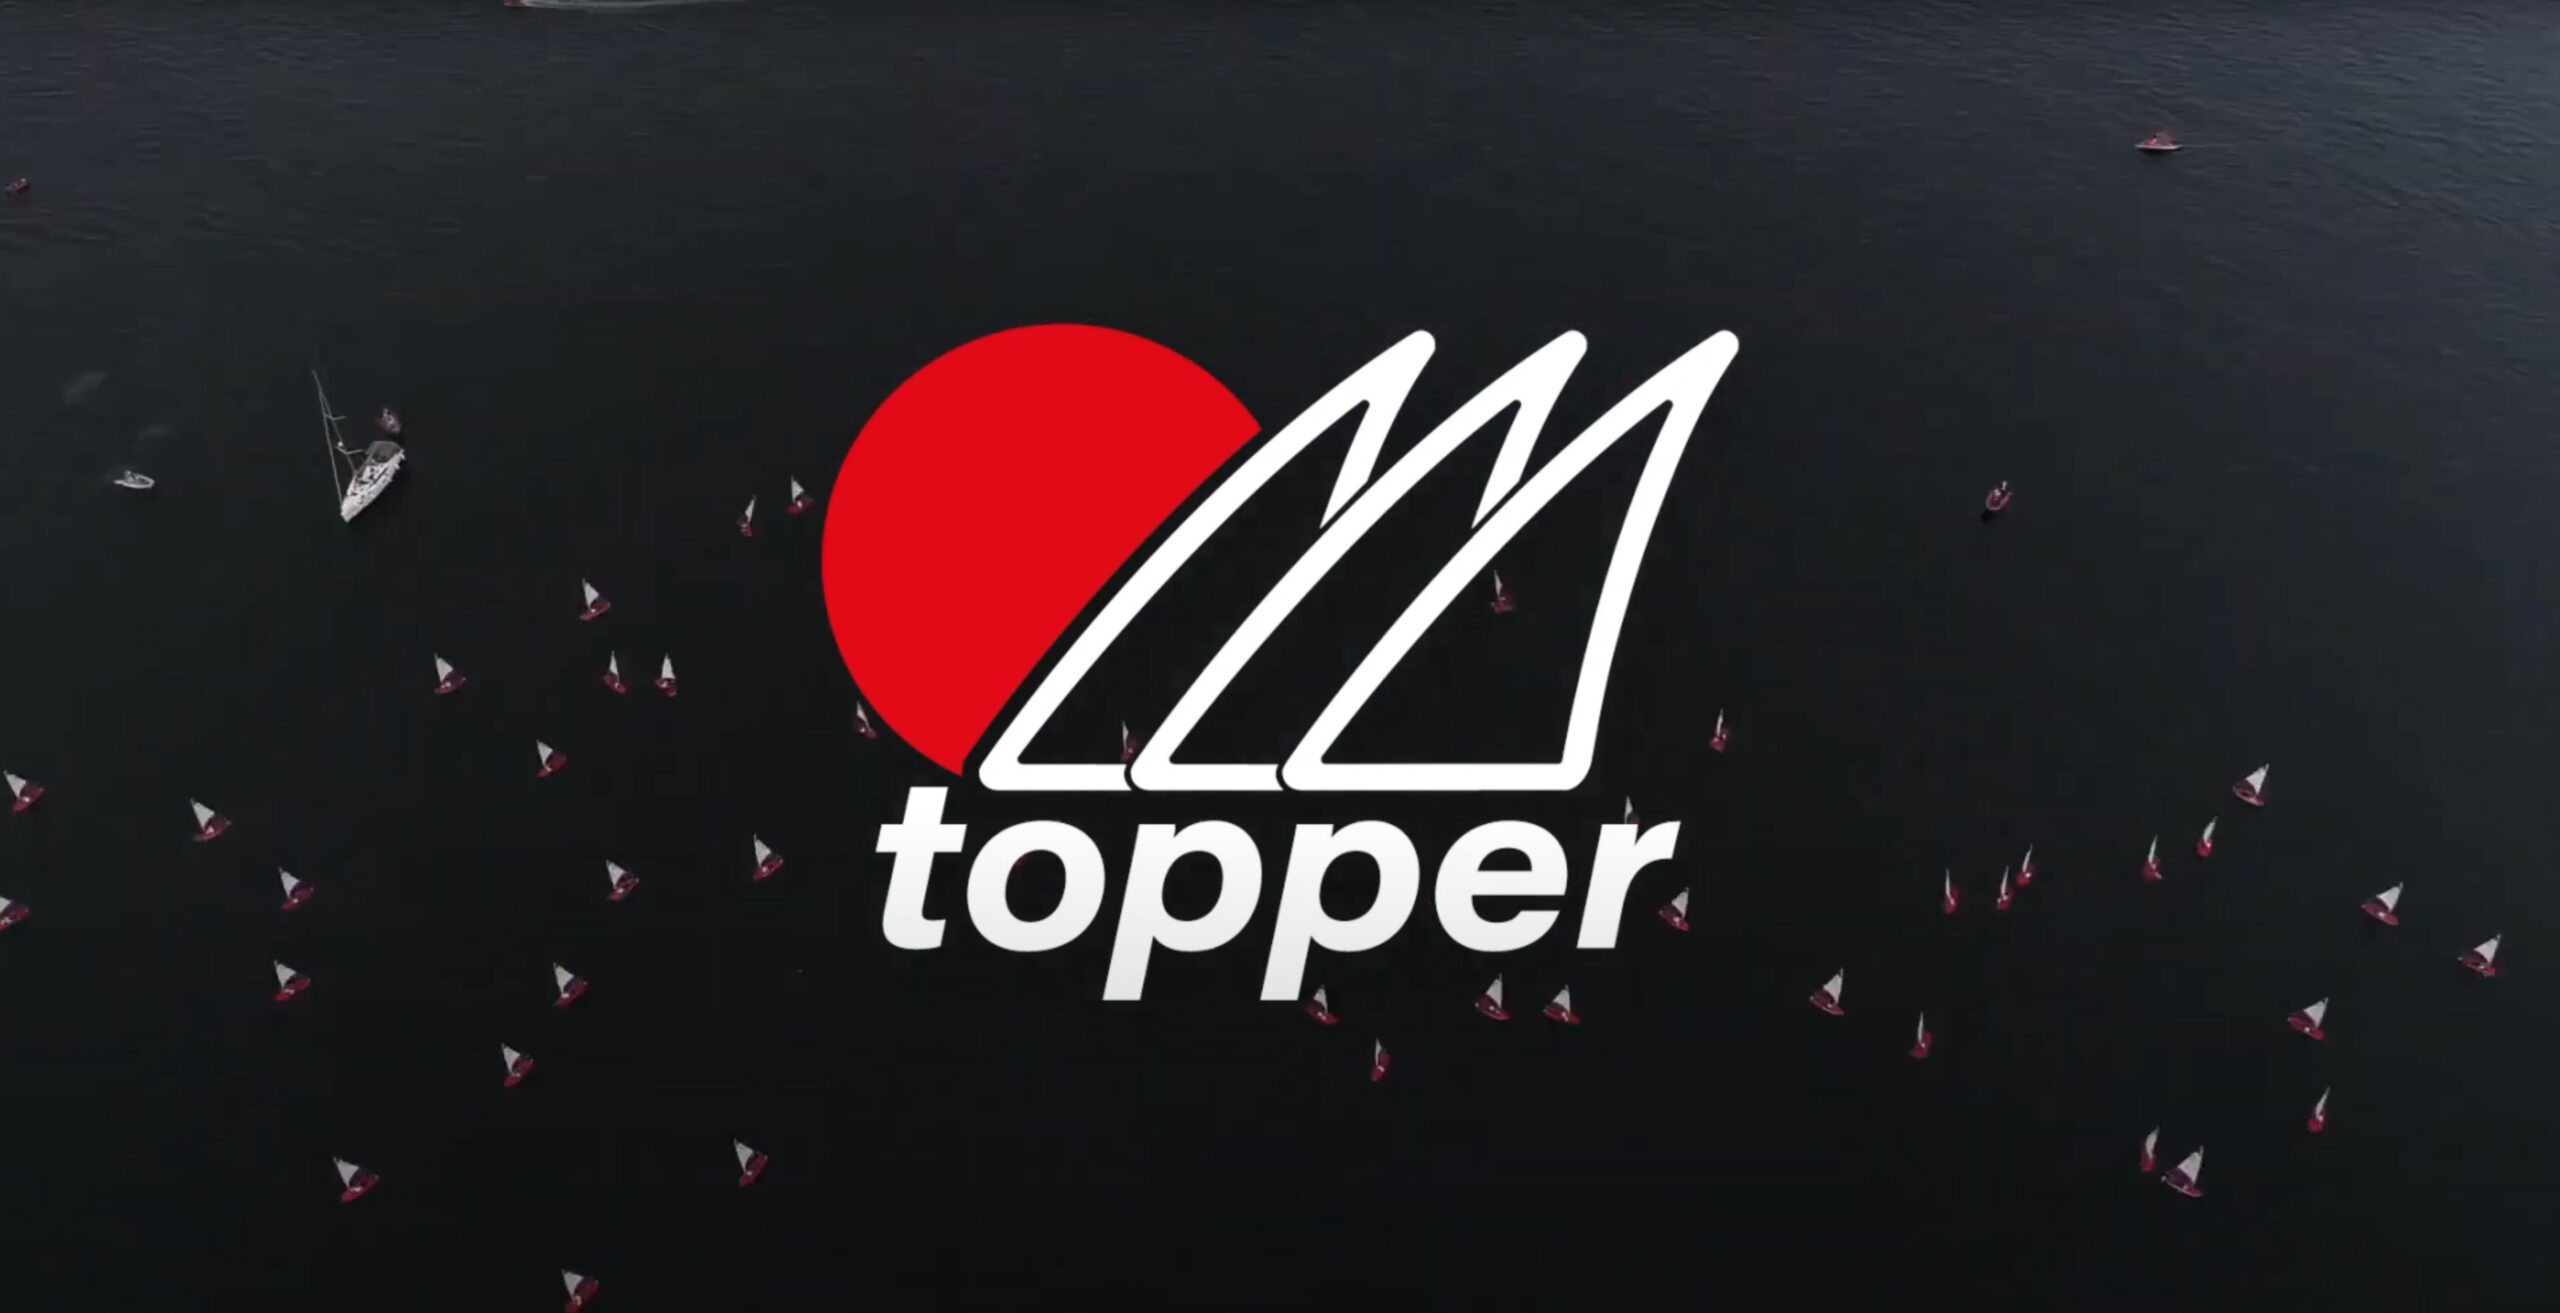 Why Topper?